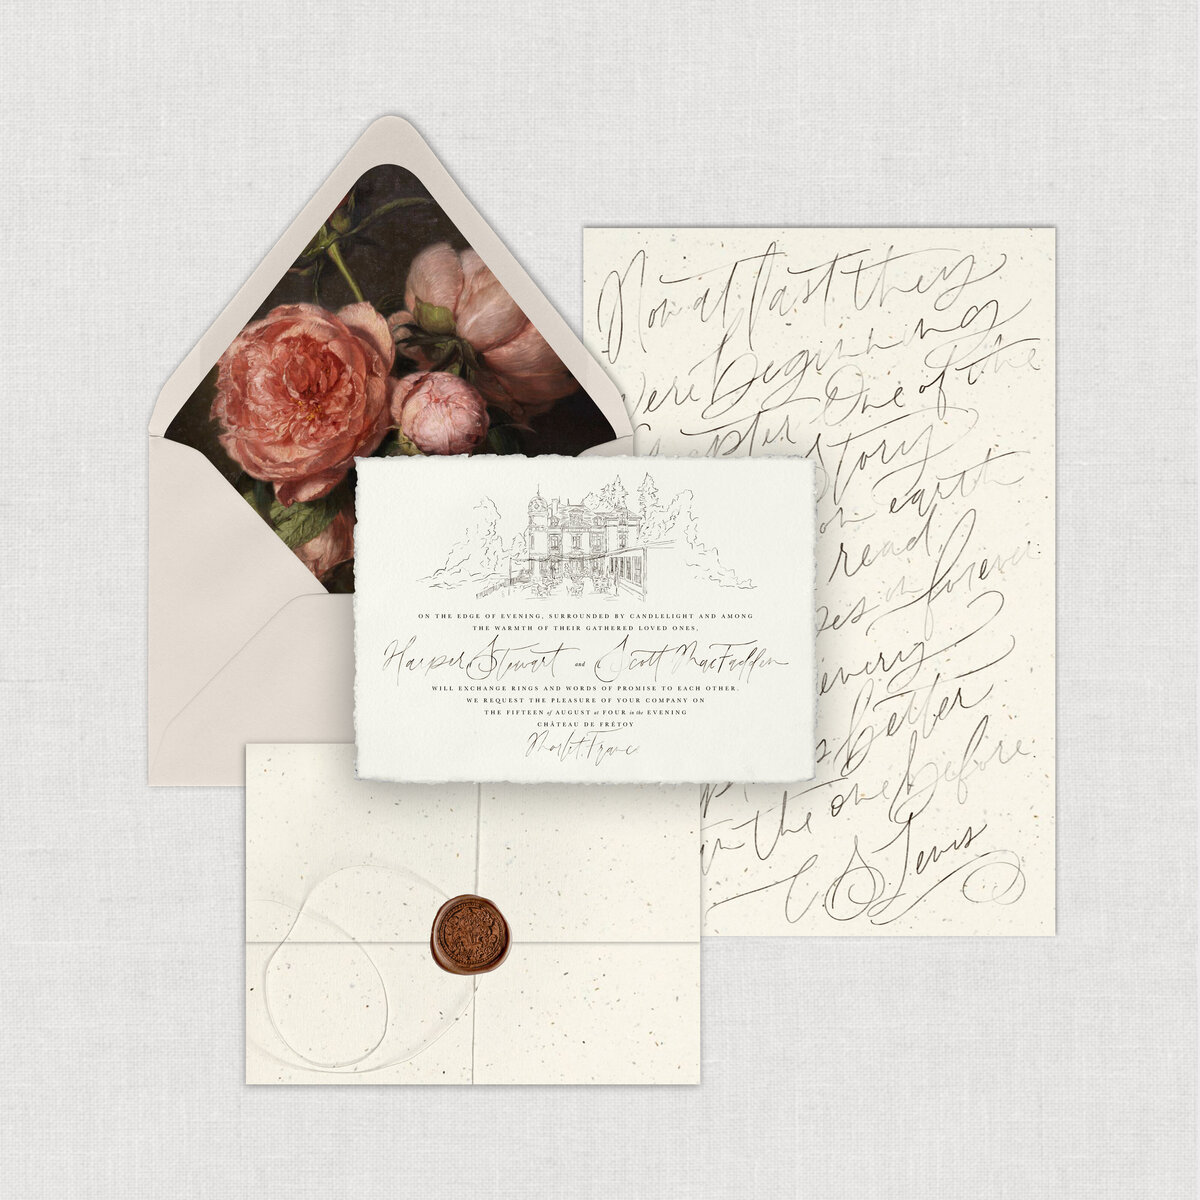 Romantic Italy Wedding Weekend Wedding Invitation with Italian venue illustration on handmade paper with wrapped with twine and a printed invitation wrap, and sealed with antique wax seal.